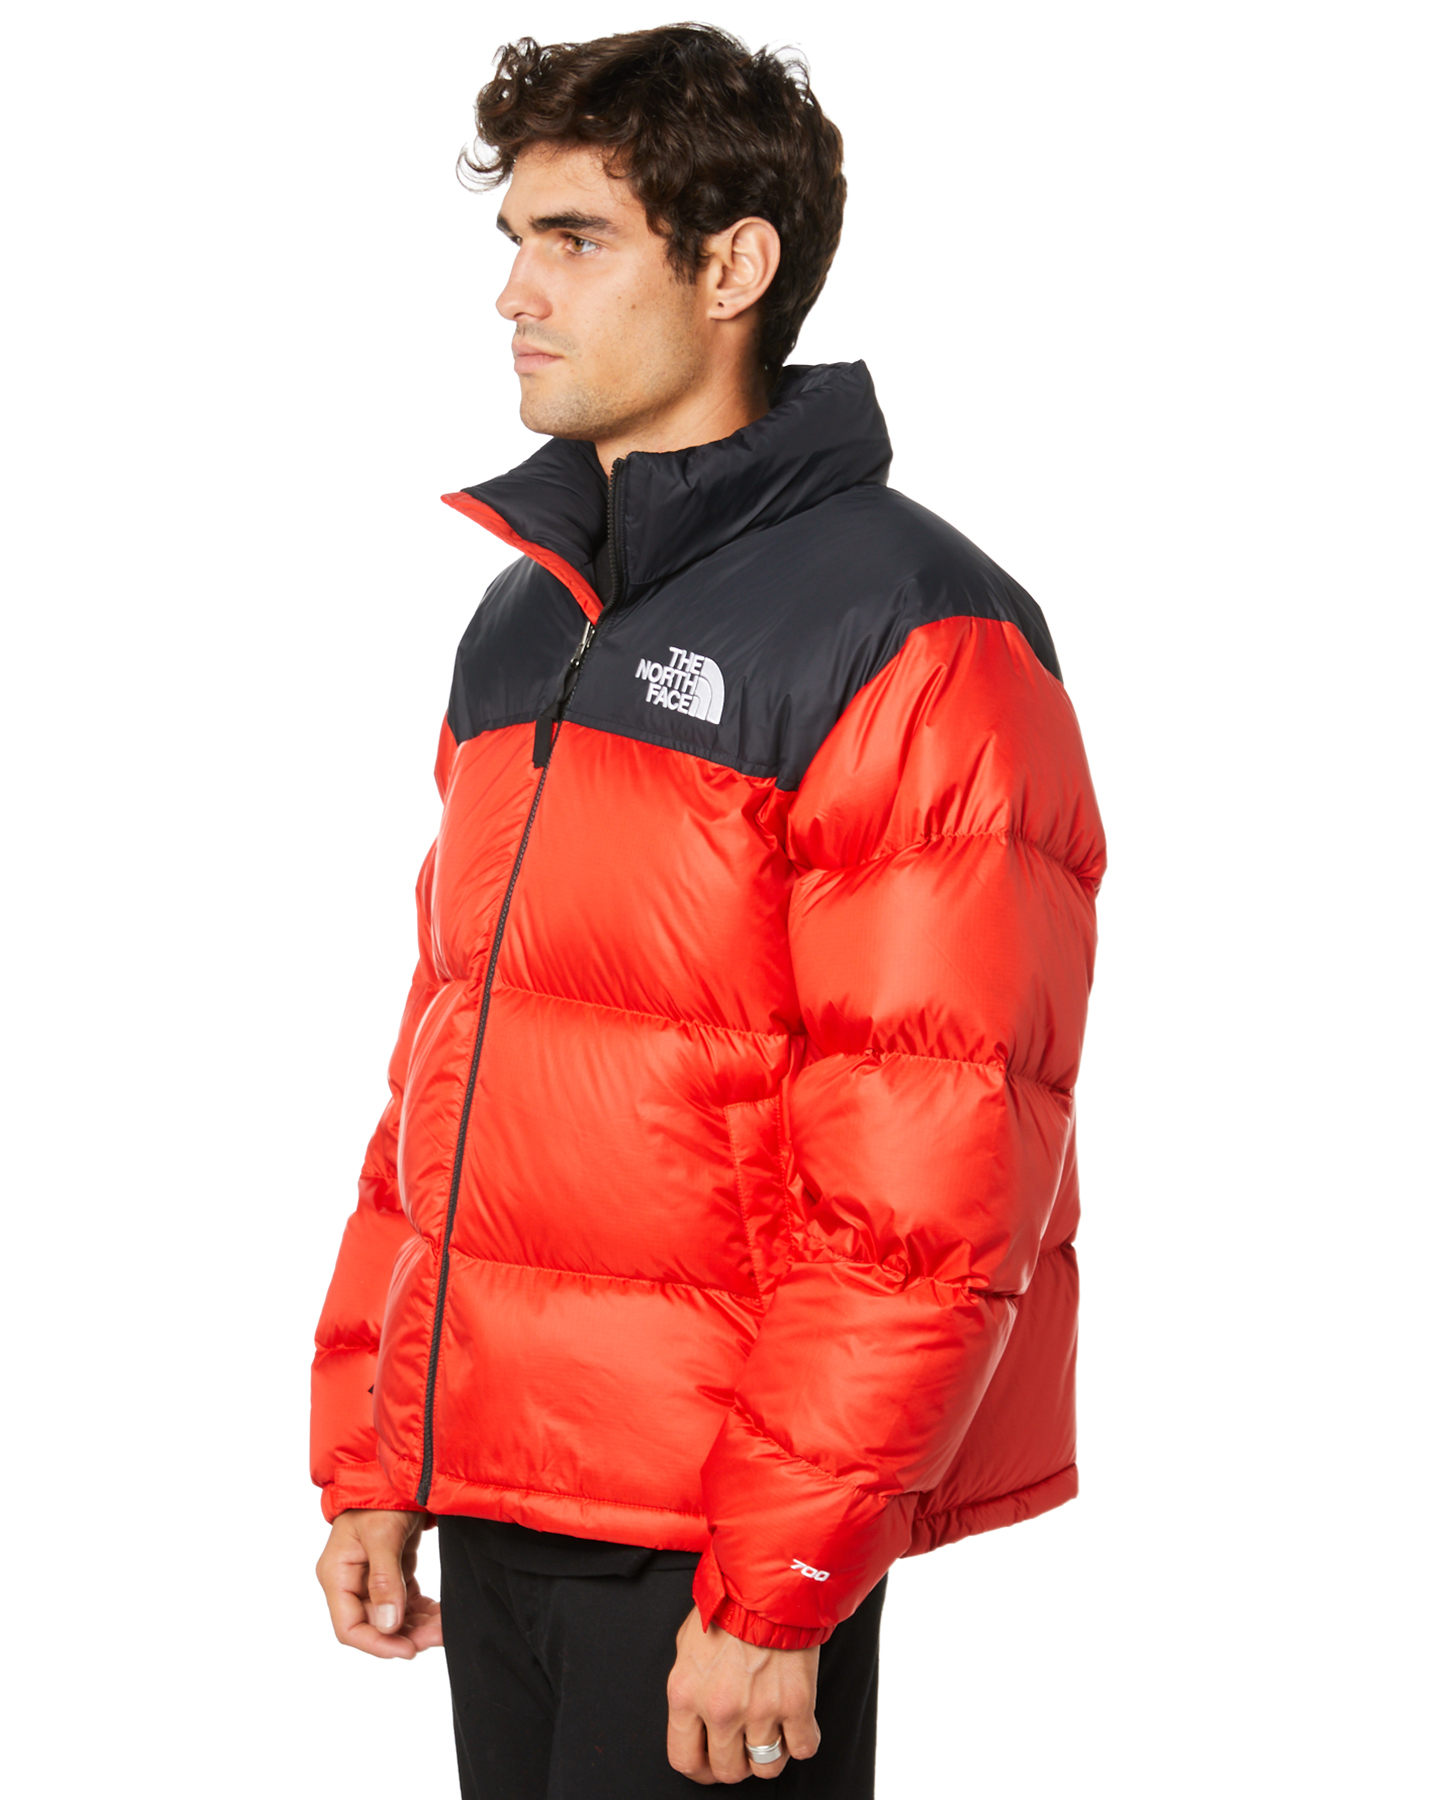 The North Face 1996 Retro Nuptse Mens Jacket - Fiery Red | SurfStitch